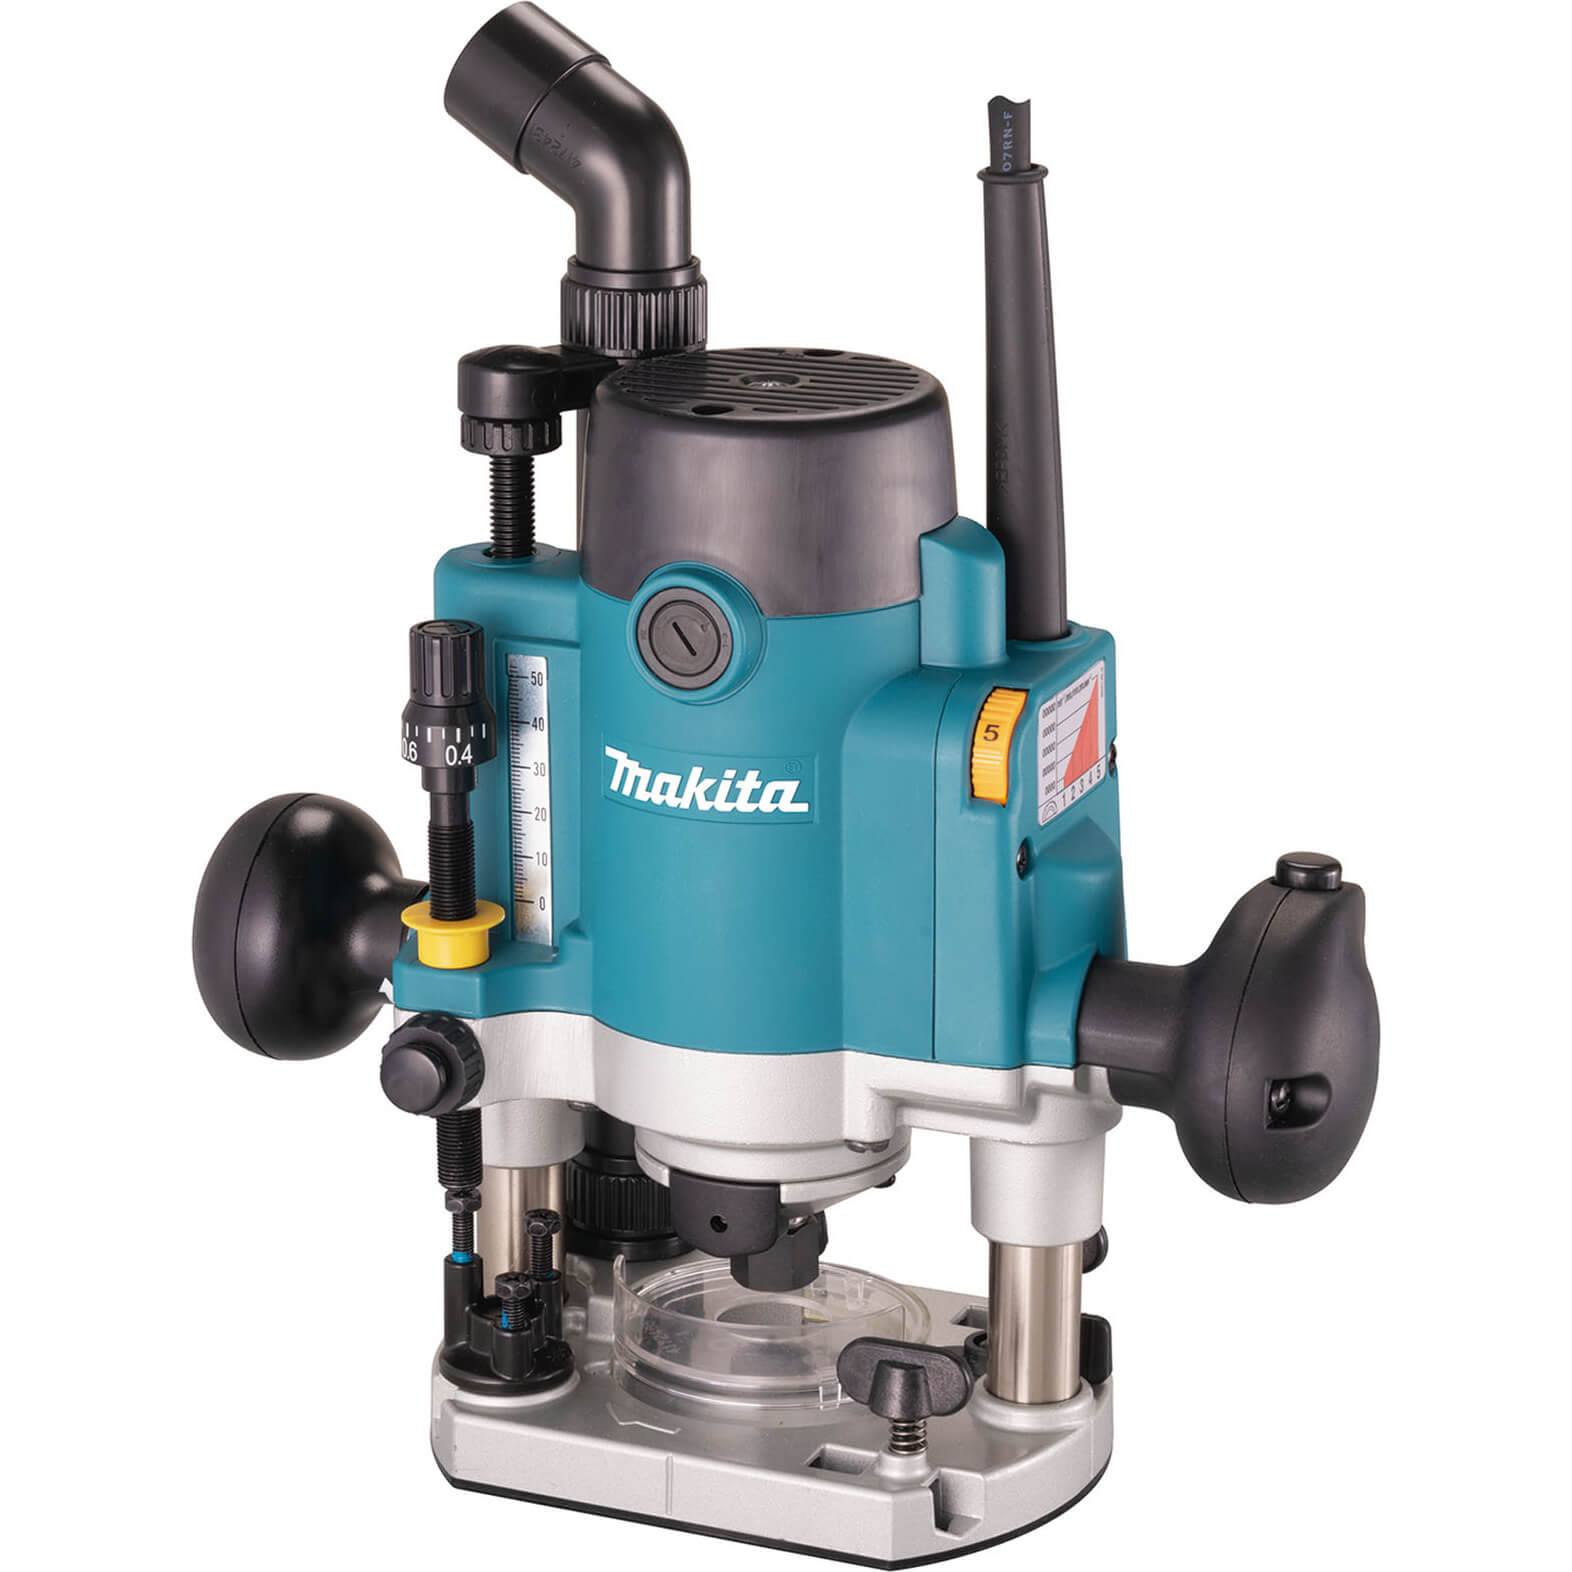 Image of Makita RP1111C 1/4" Plunge Router 240v